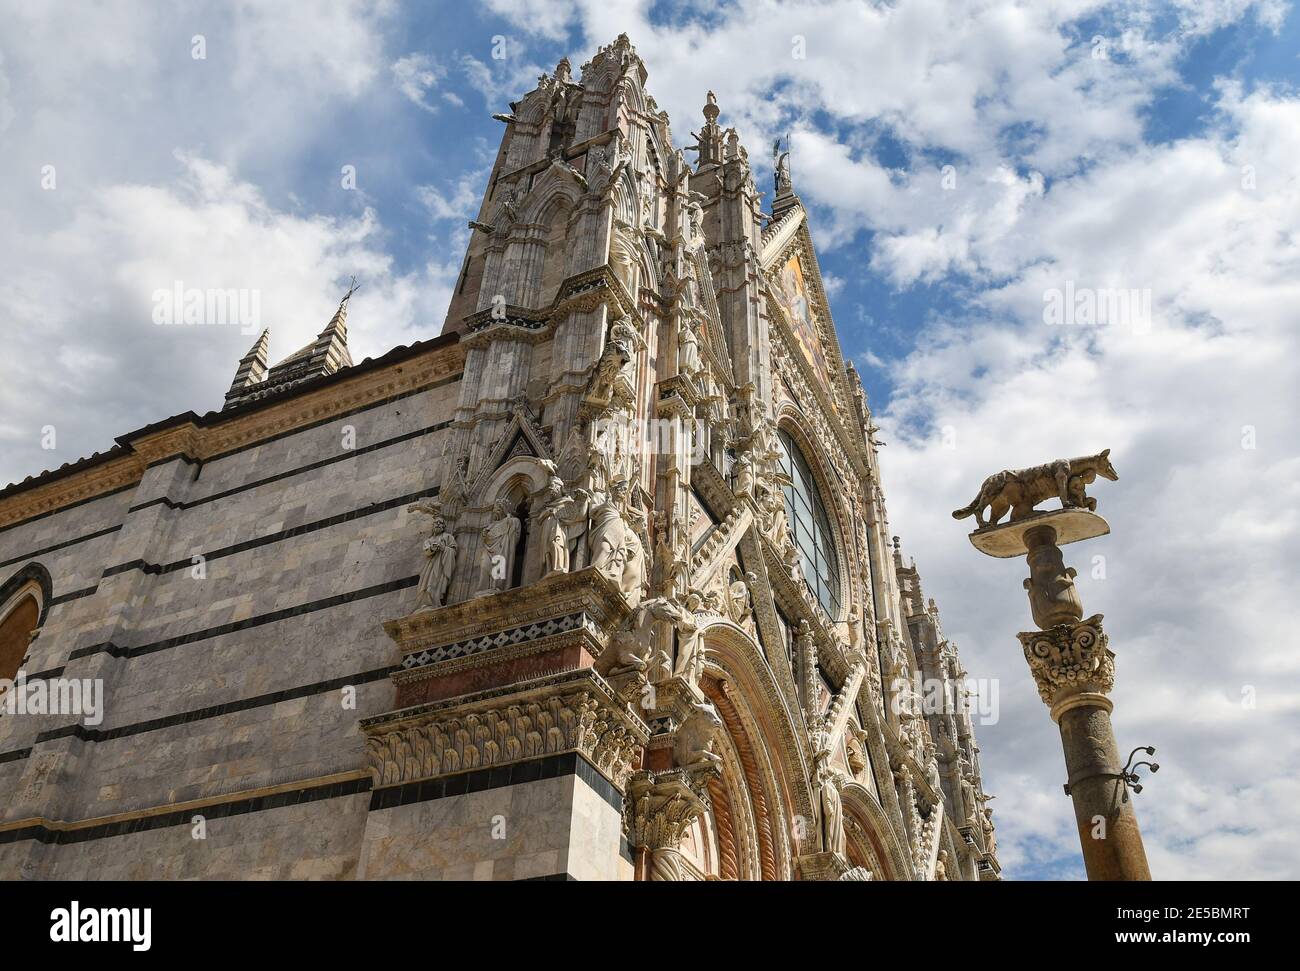 Left side of the Siena Cathedral (Saint Mary of the Assumption) in Romanesque-Gothic style with the Siennese Wolf on a column, Tuscany, Italy Stock Photo